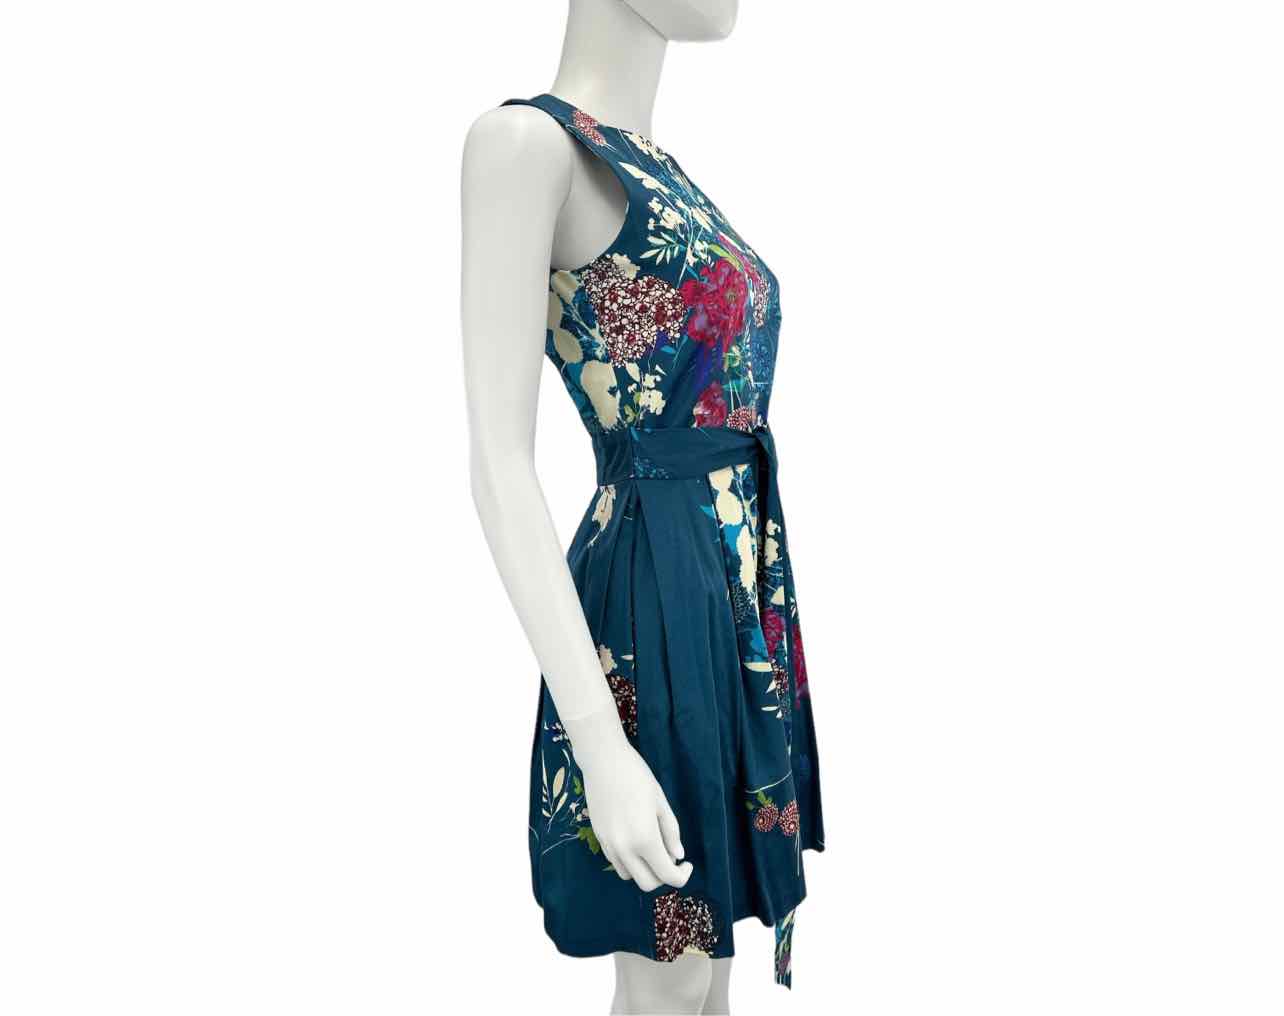 Closet London NWT Teal Floral Print Fit & Flare Dress Size 2